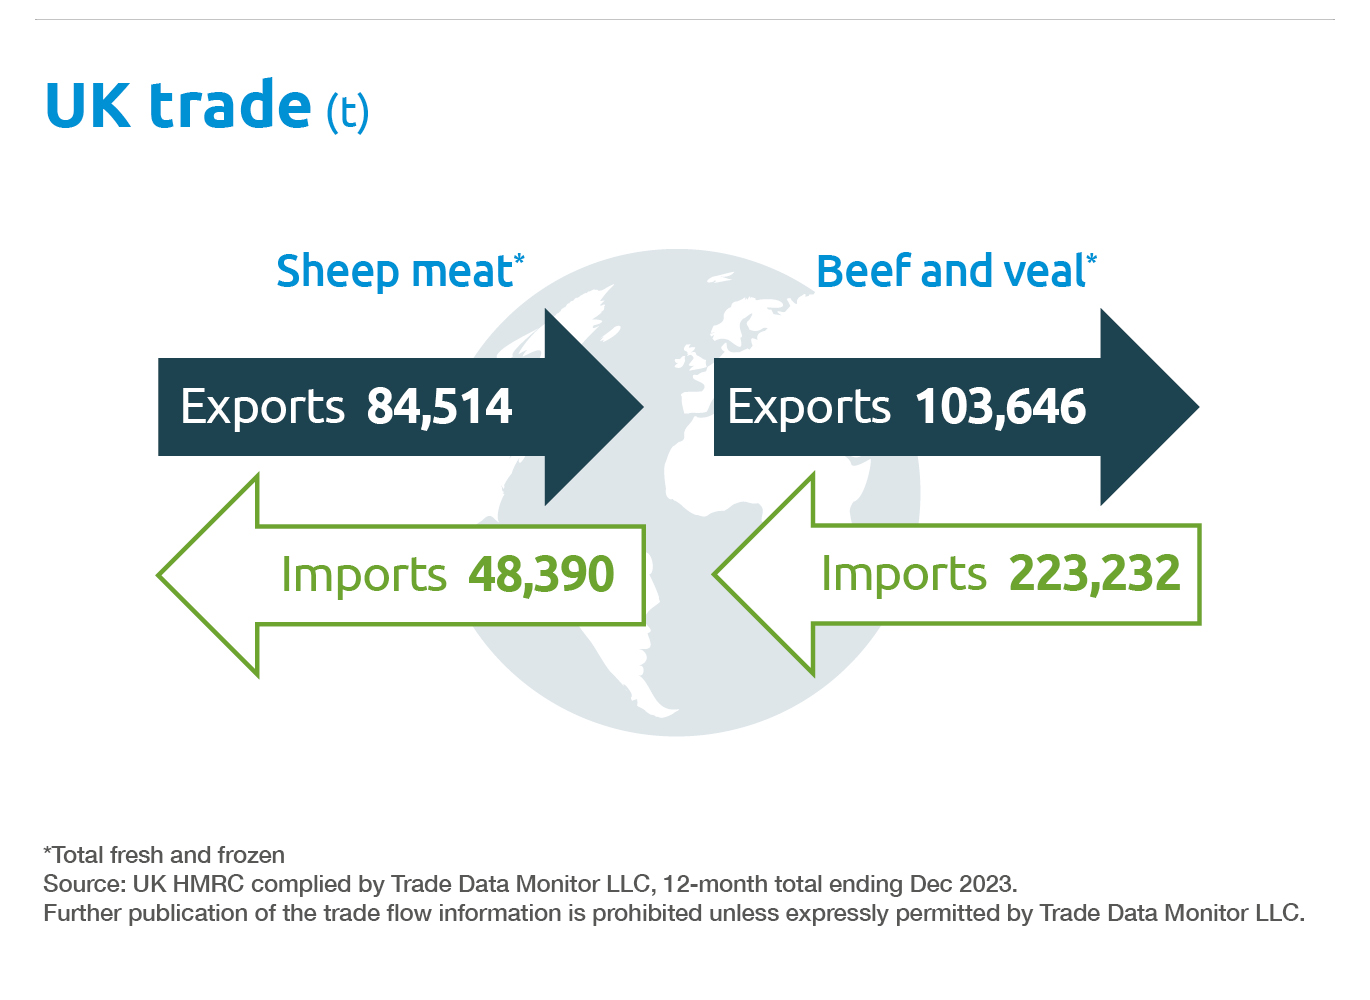 UK trade of sheep meat, beef and veal - Spring 2024 market intelligence.